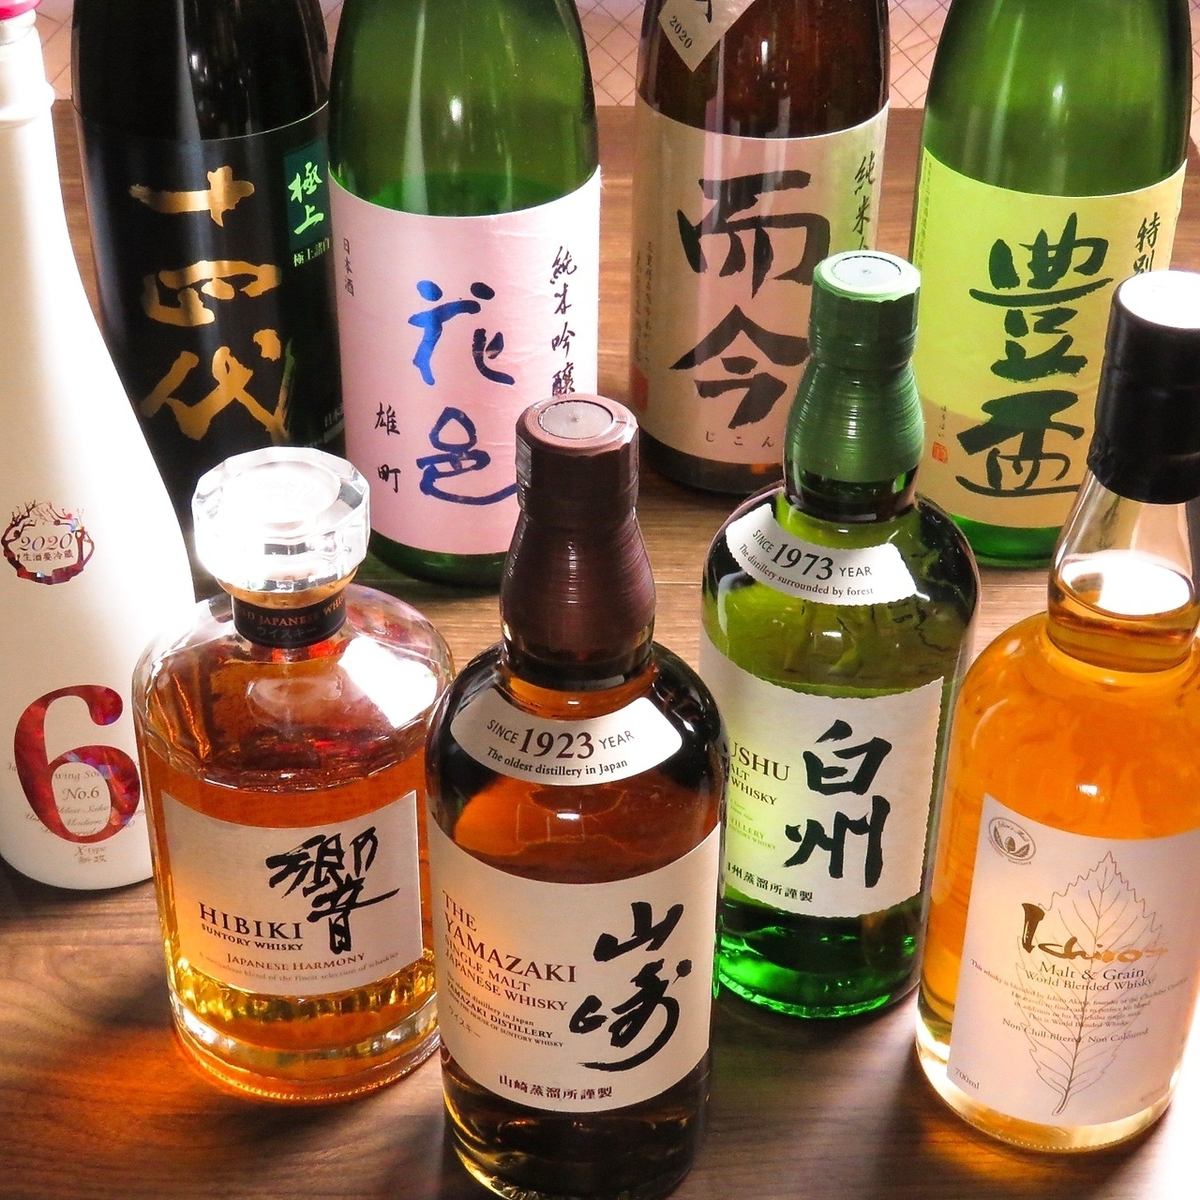 We have local sake from each region!